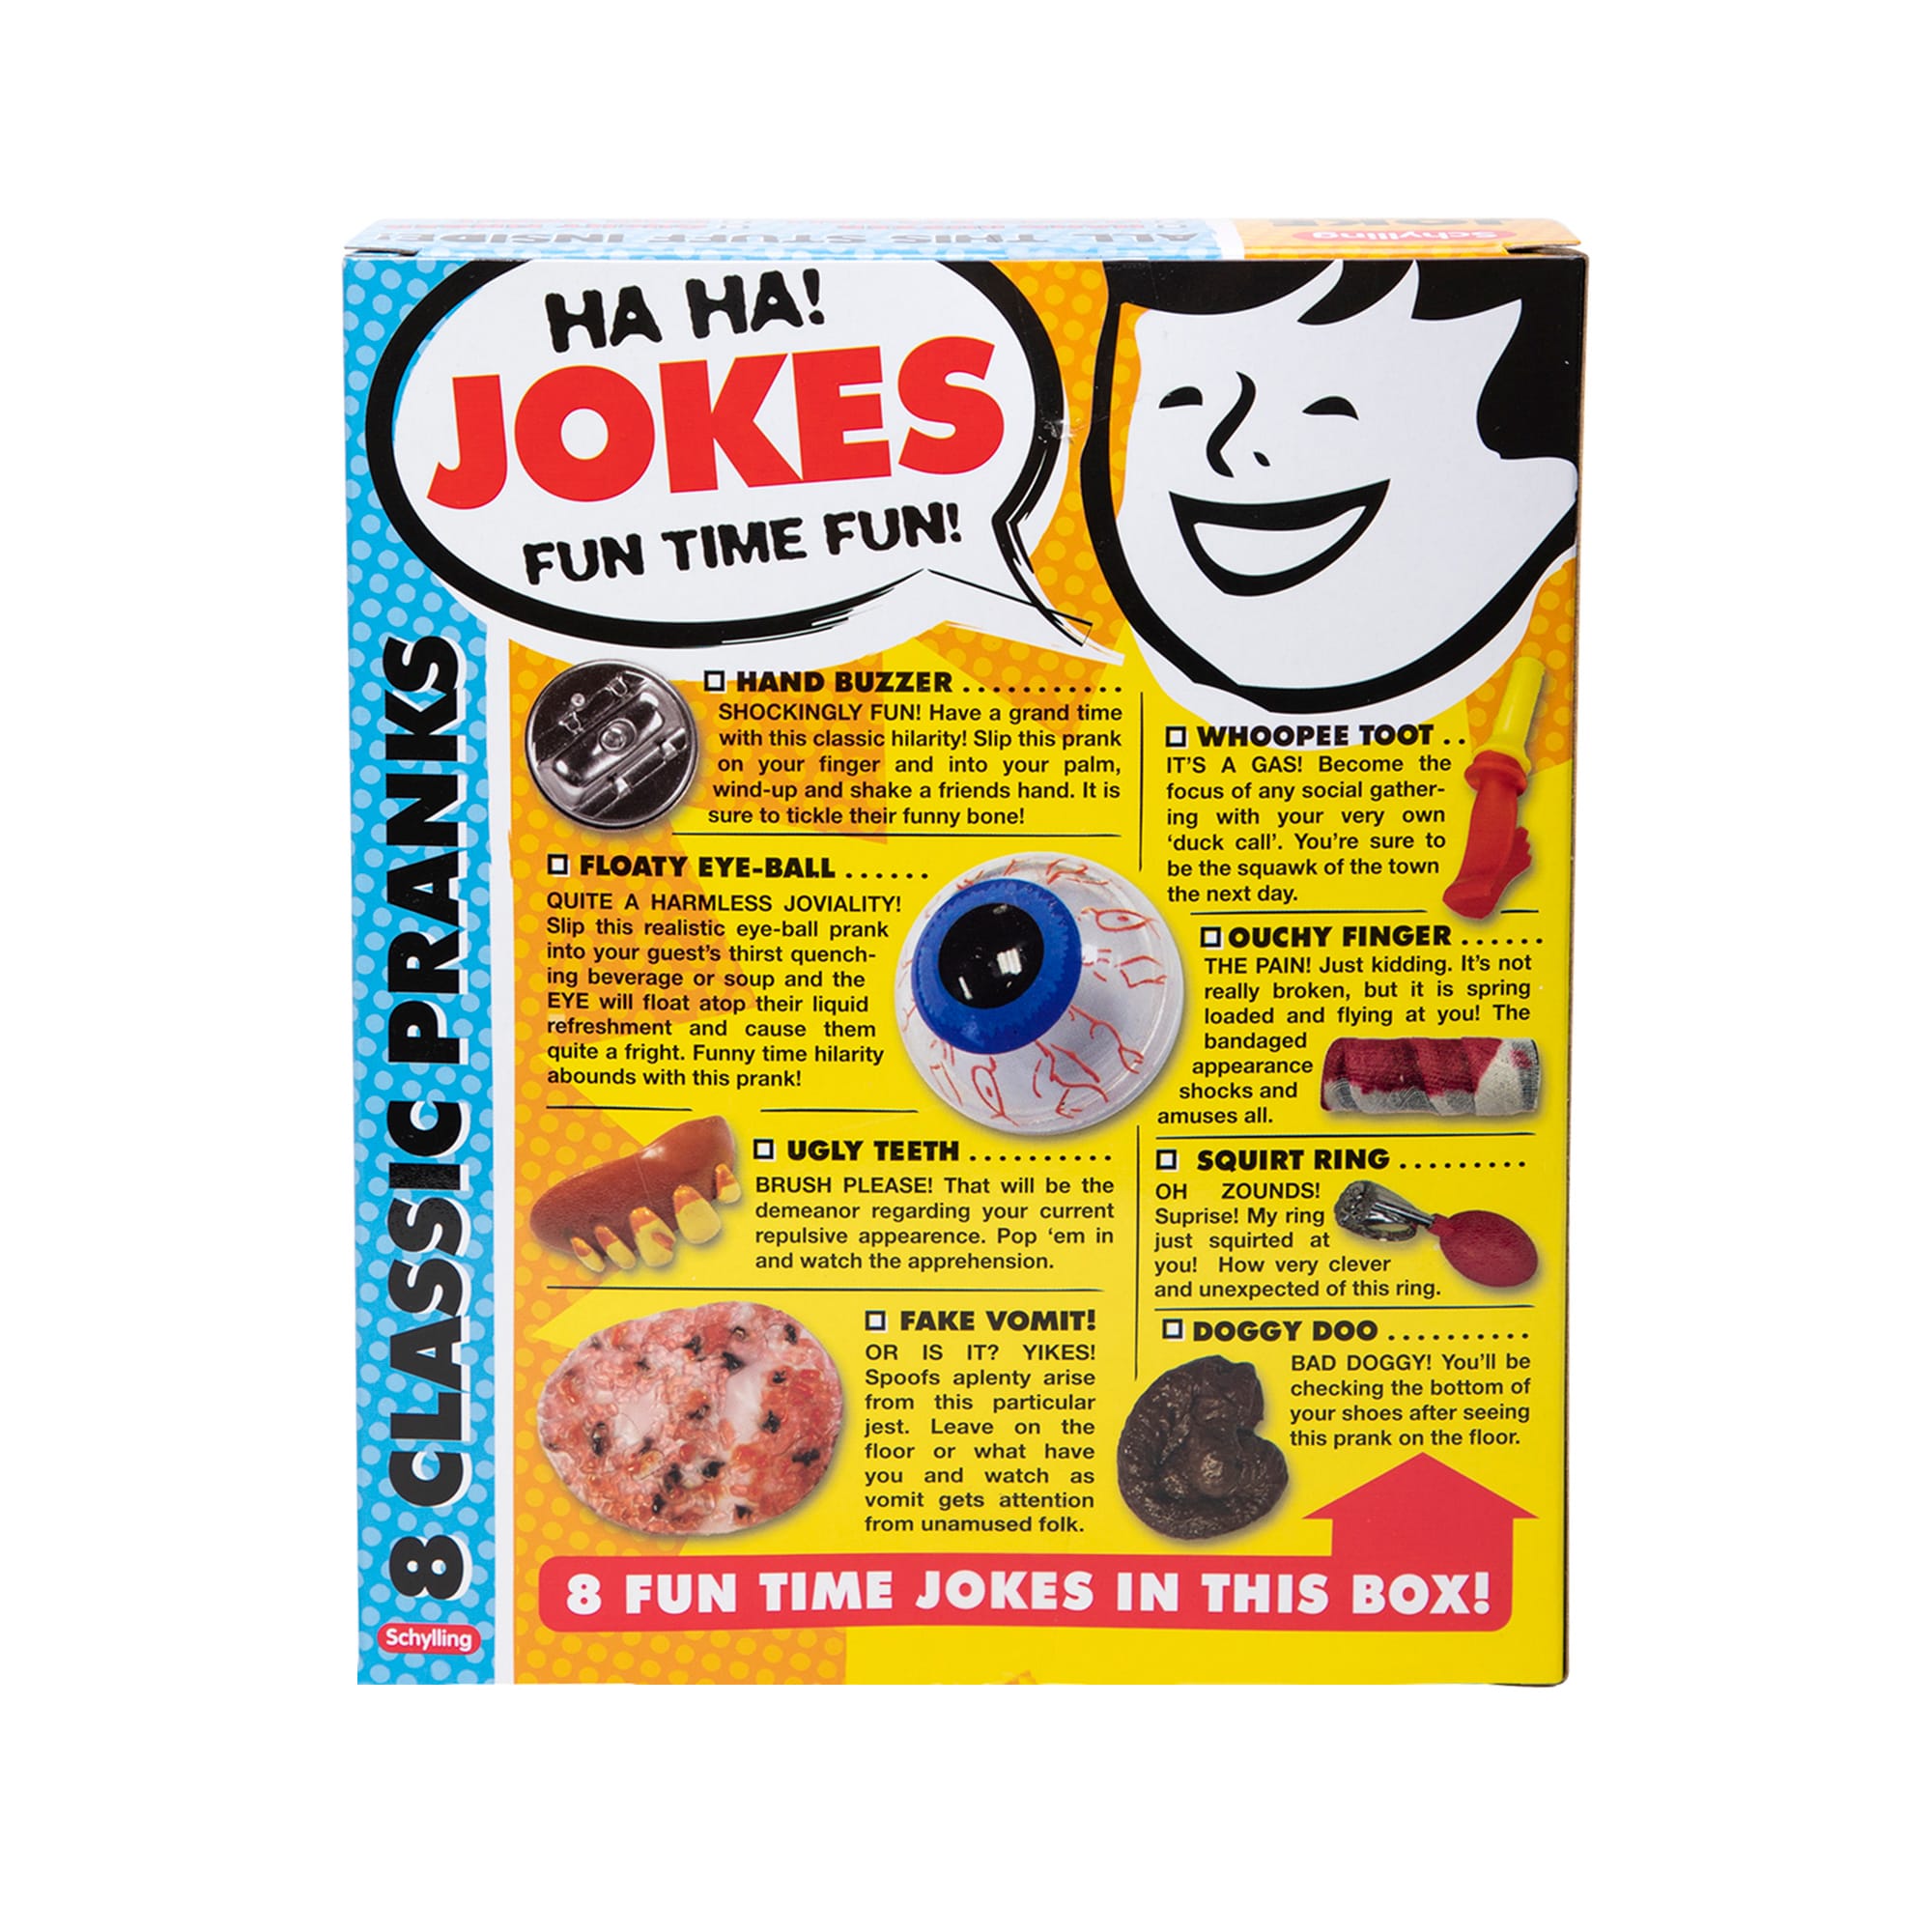 Front view of Joke Box showing the contents including: ugly teeth, floaty eye-ball, squirt ring, hand buzzer, doggy doo ouchy finger, whoopee toot, and fake vomit.